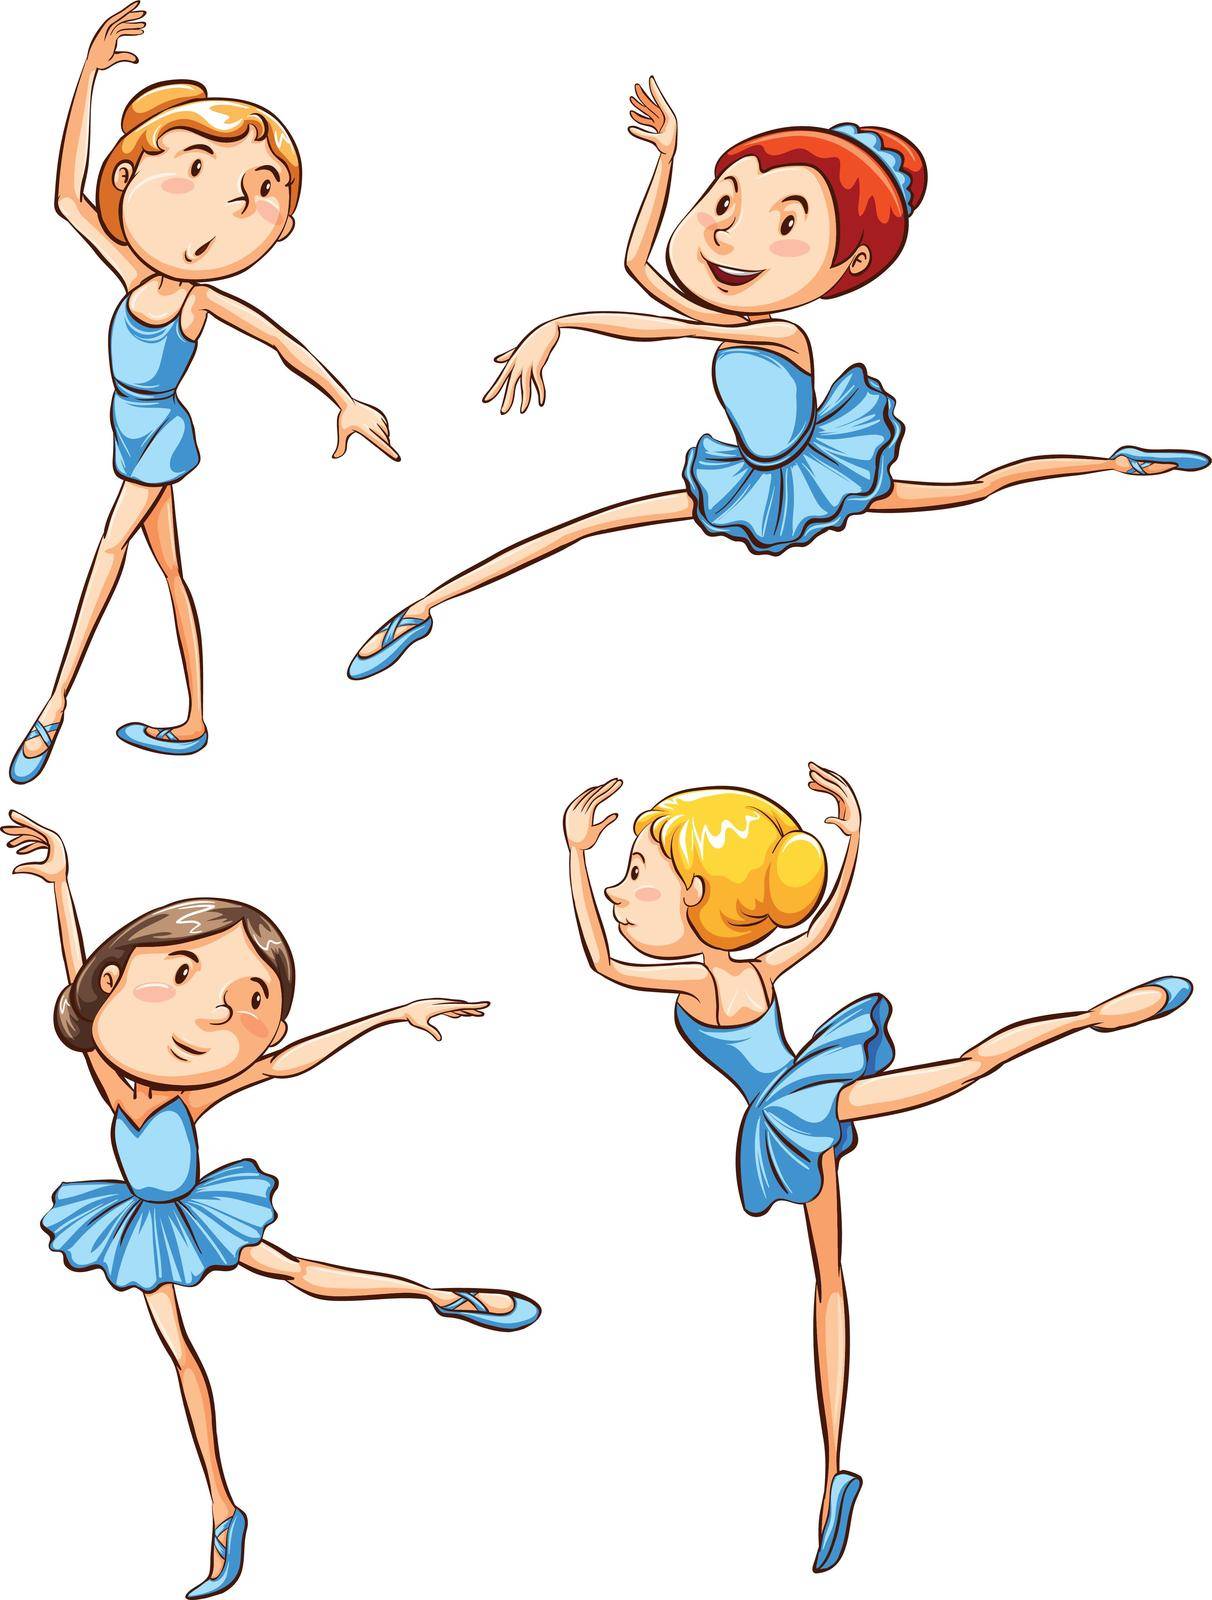 Illustration of the coloured sketches of the ballet dancers on a white background